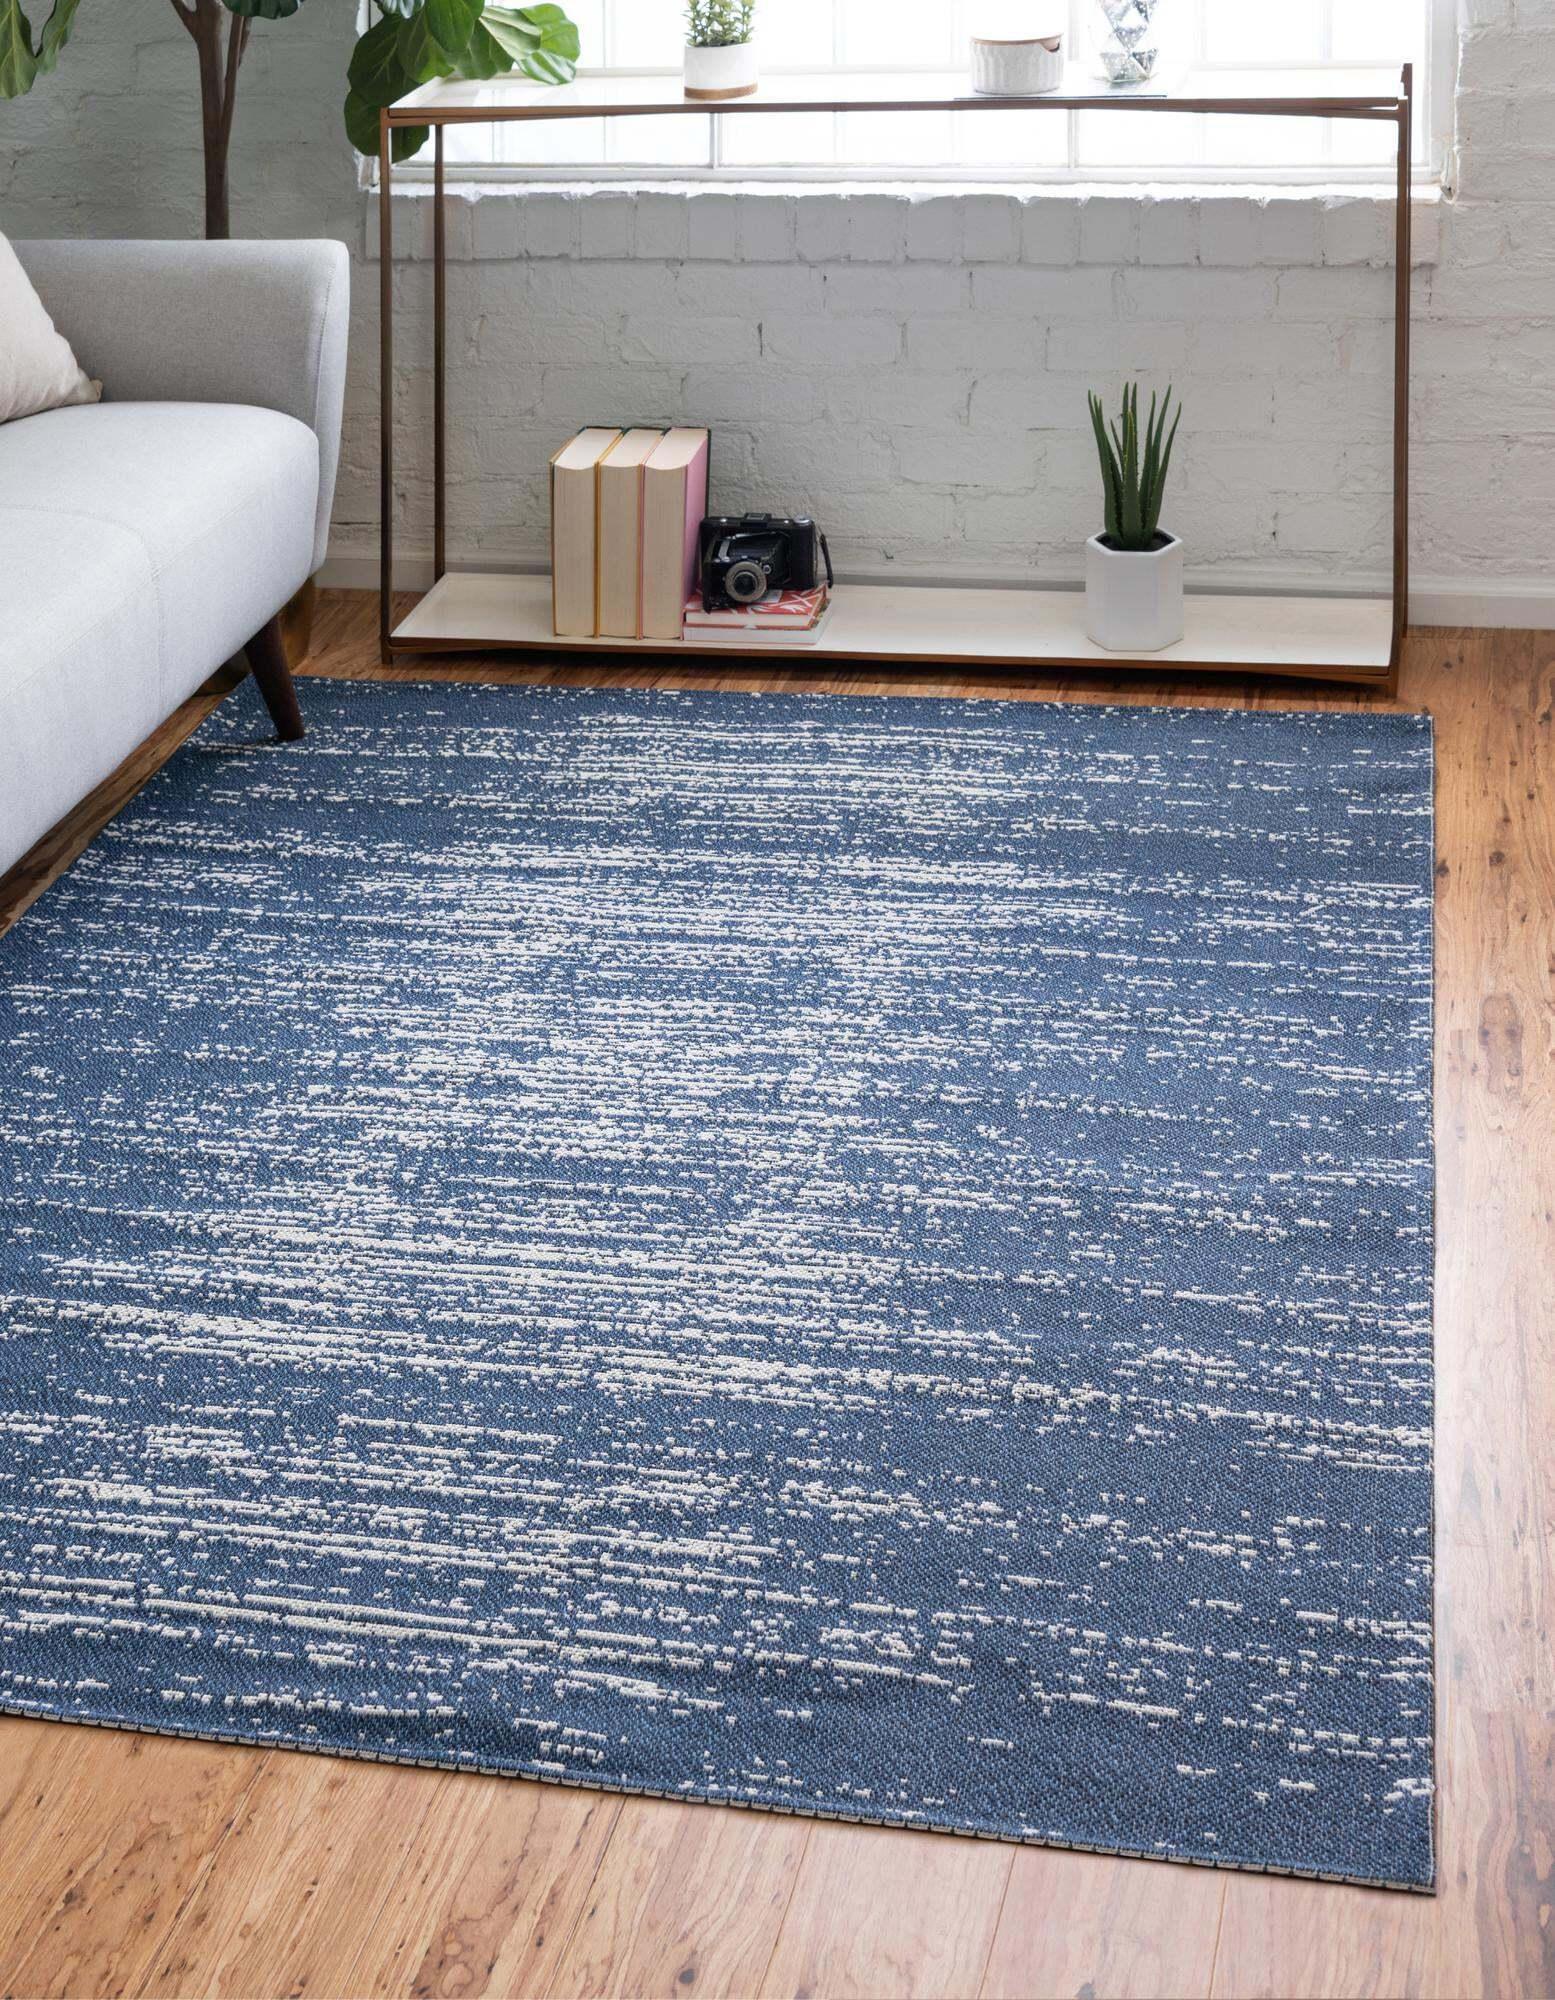 Unique Loom Indoor Rugs - Decatur Abstract Rectangular 8x11 Rug Navy Blue & Ivory